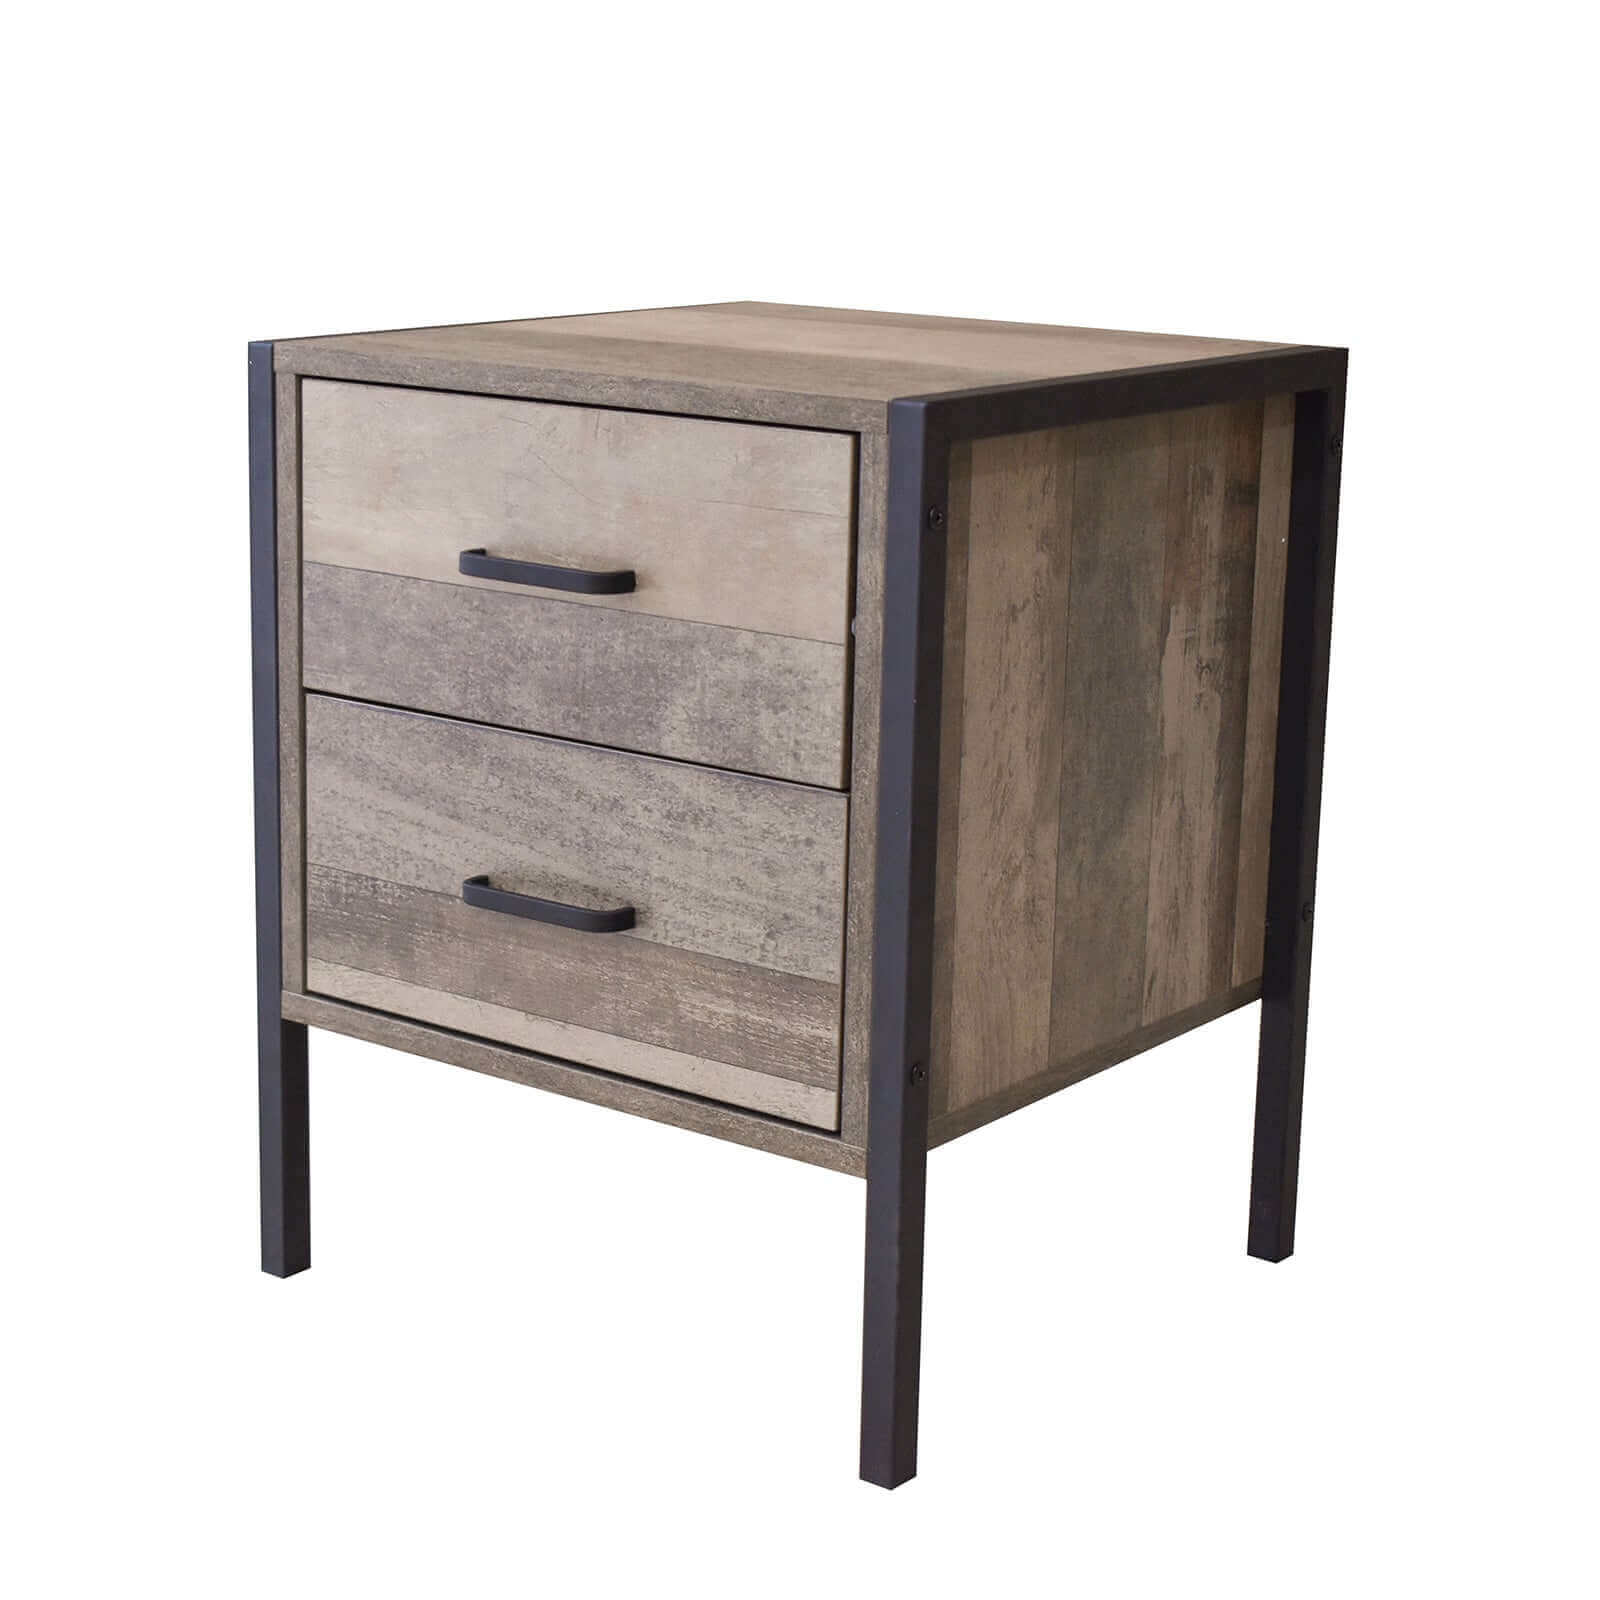 Milano Decor Bedside Table Palm Beach Drawers Nightstand Unit Cabinet Storage-Upinteriors